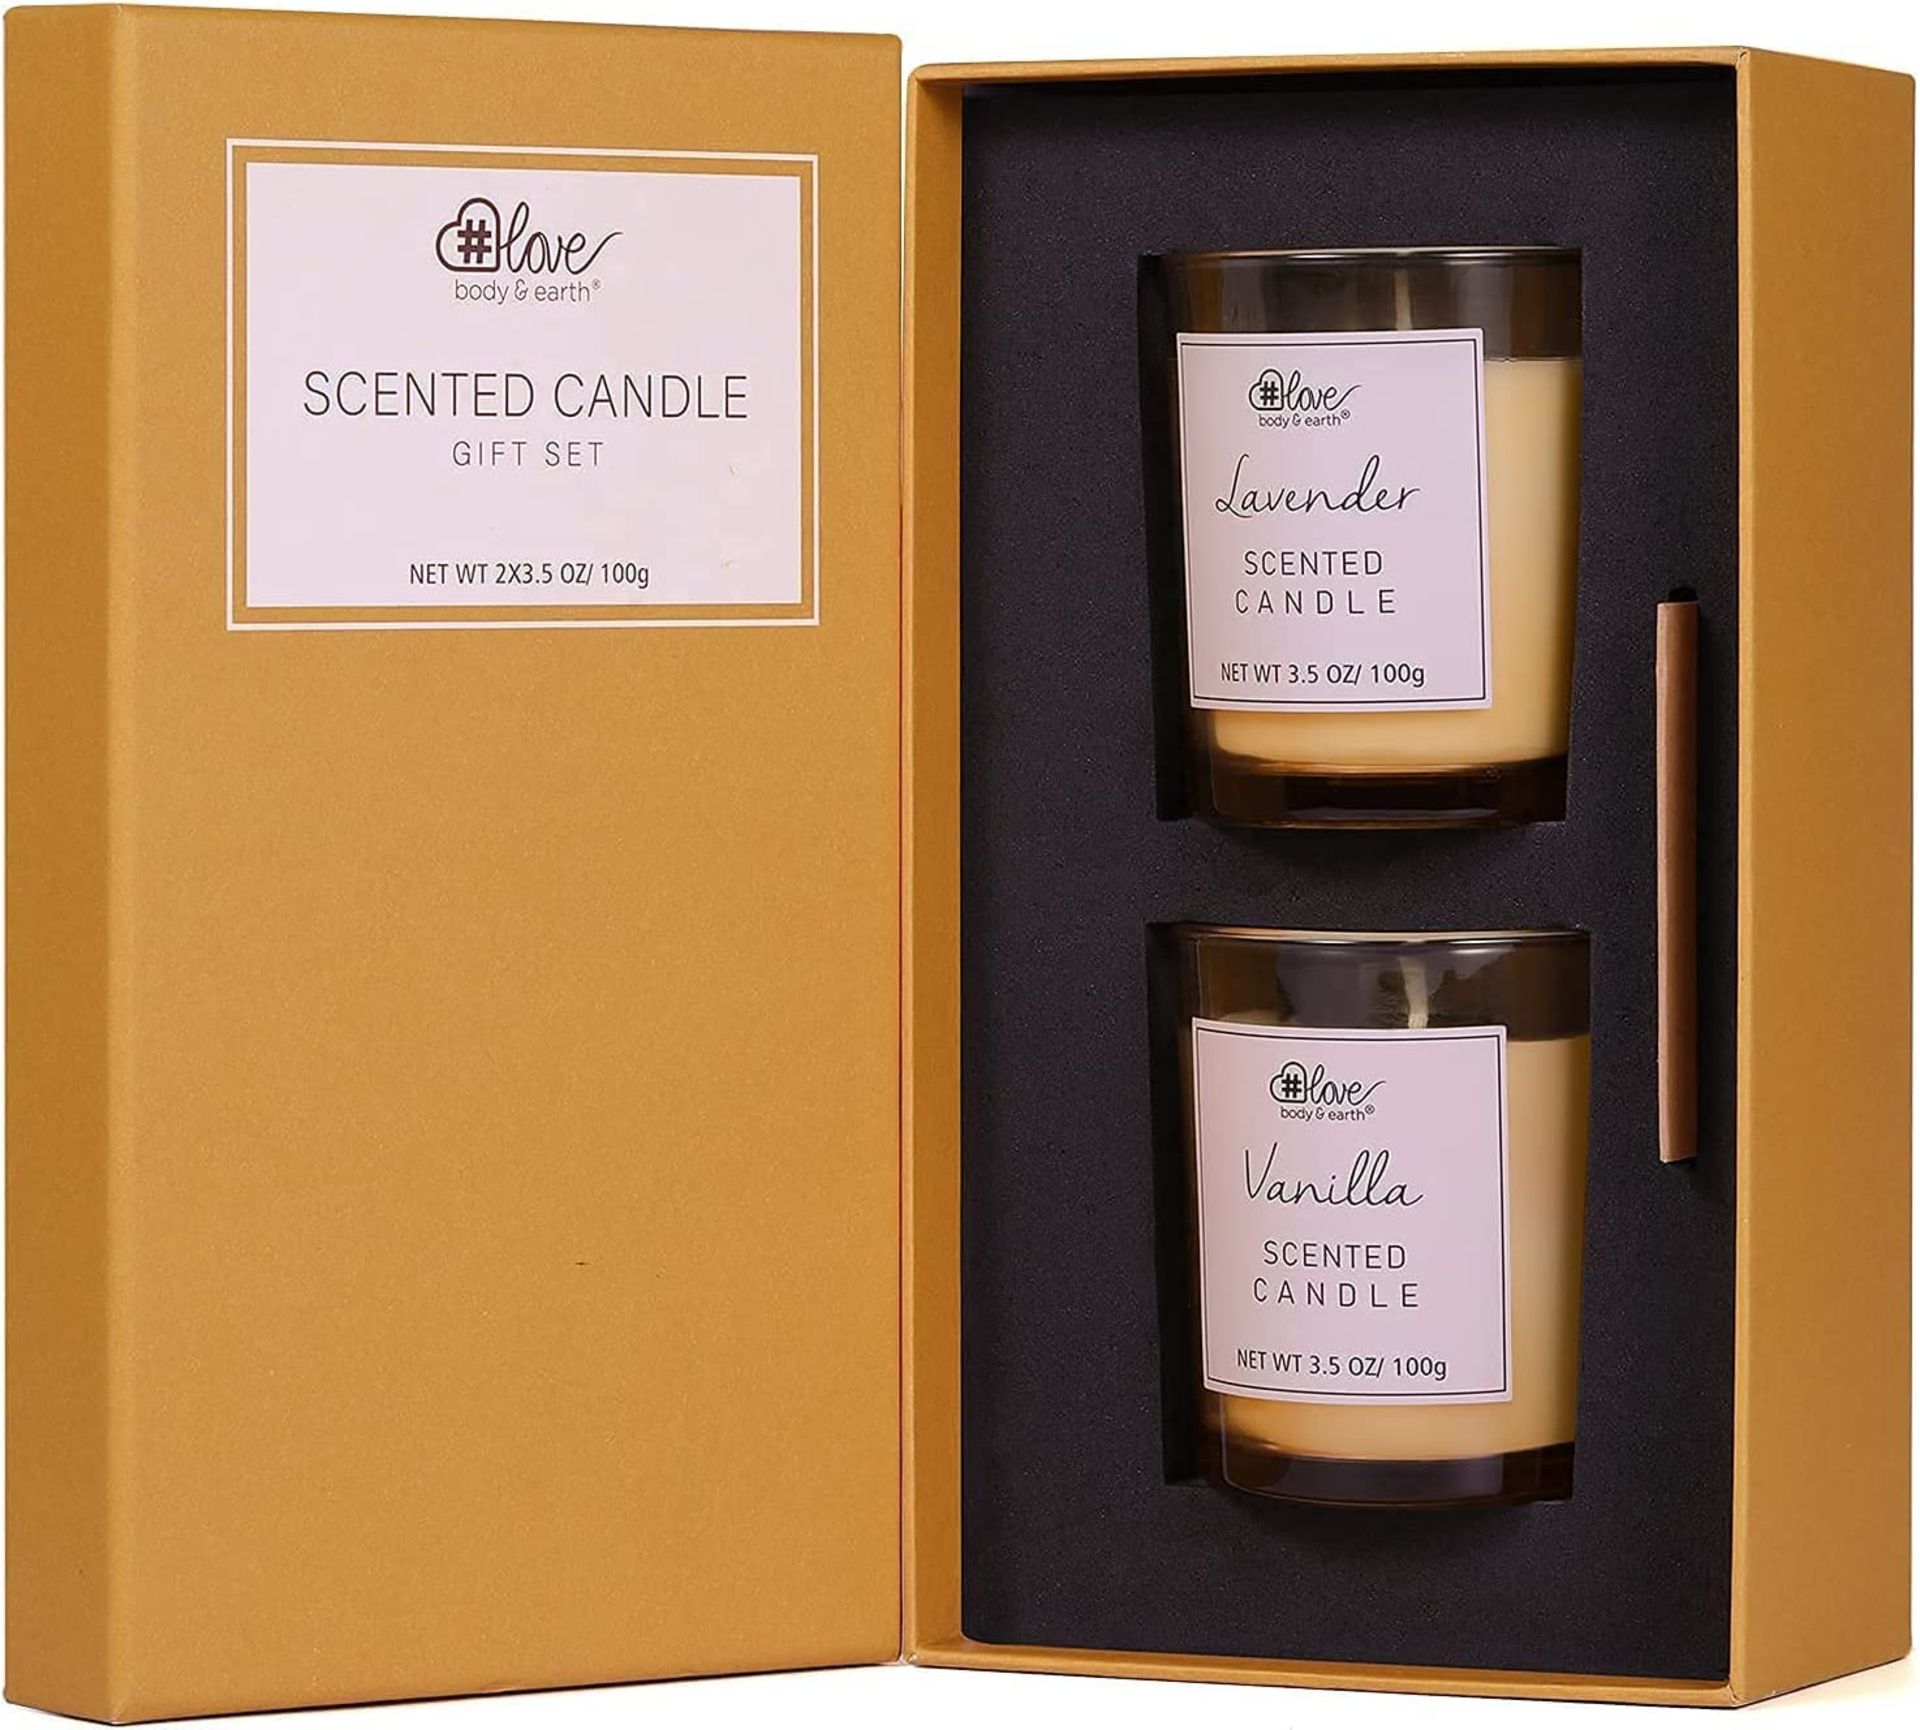 PALLET TO CONTAIN 96 x New Boxed Sets of 2 Scented Candle. (SKU:BEL-SC-02-ROW14). 2 FRAGRANCE